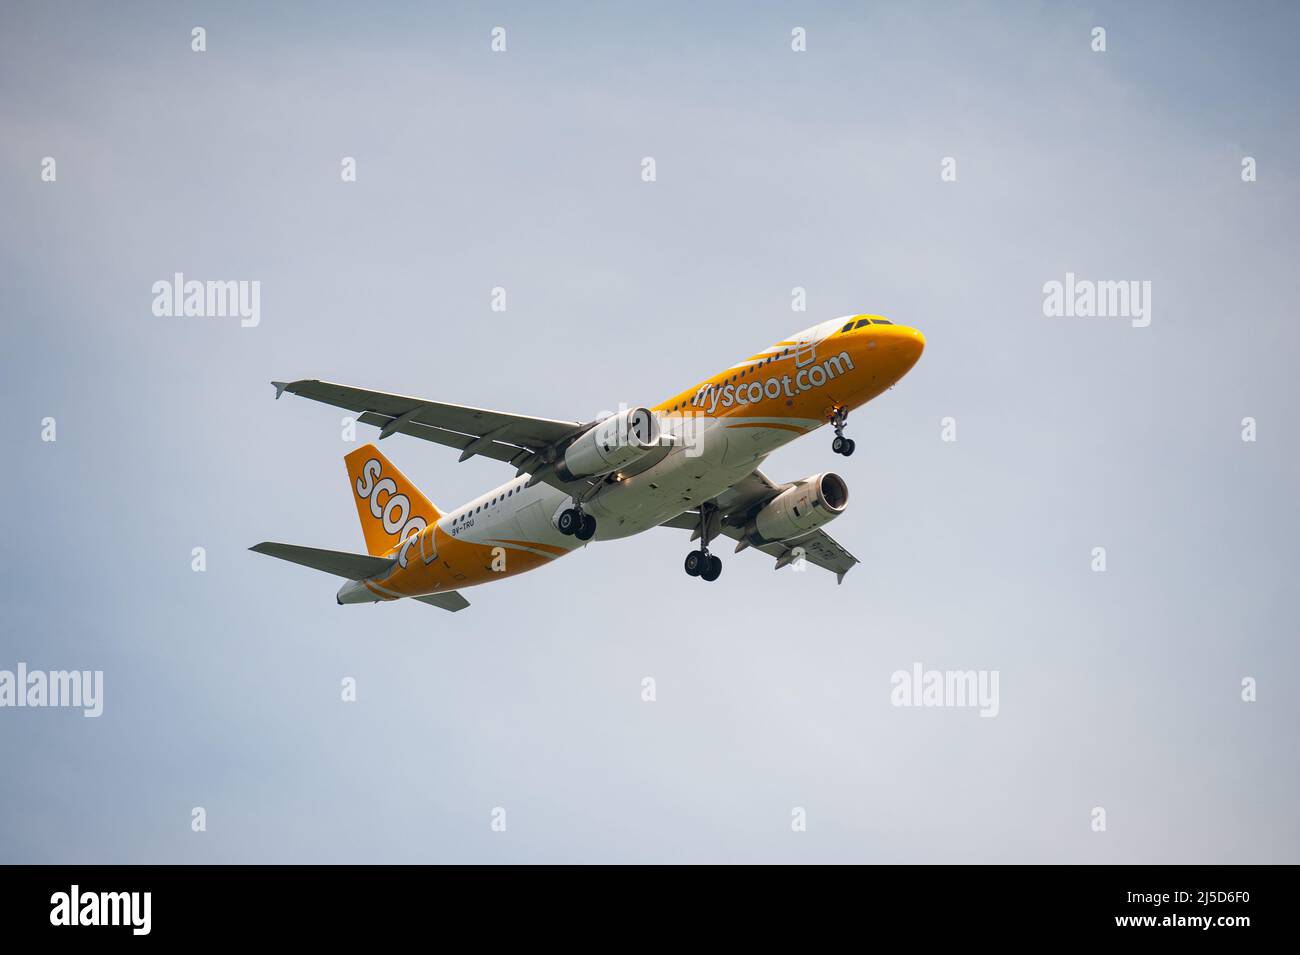 Nov. 29, 2021, Singapore, Republic of Singapore, Asia - A Scoot Airlines Airbus A320 passenger aircraft with registration 9V-TRU on approach to Changi International Airport. Scoot is a low-cost airline from Singapore and a subsidiary of Singapore Airlines. [automated translation] Stock Photo